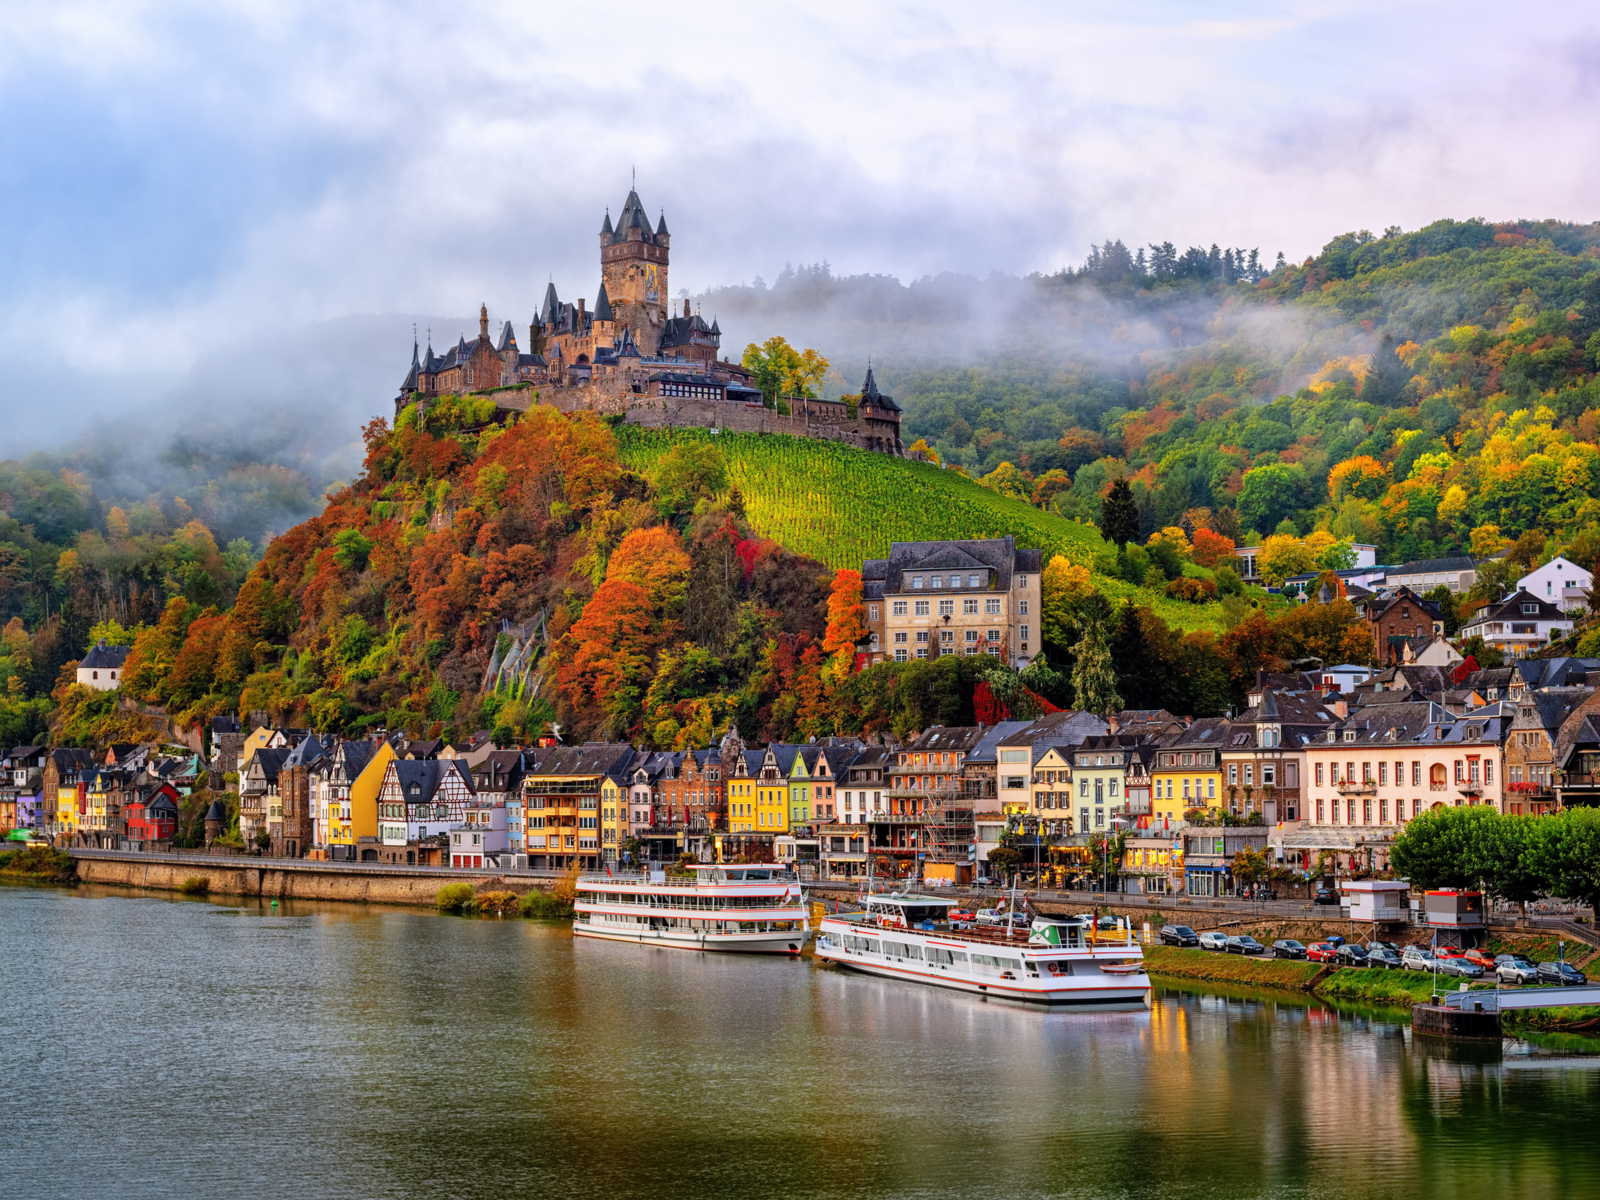 Mistry Cochem Imperial Castle also known as Reichsburg Castle is one of the best castles in Germany, erected on top of a hill at Cochem Town on Autumn with two passenger boats on the calm Moselle River